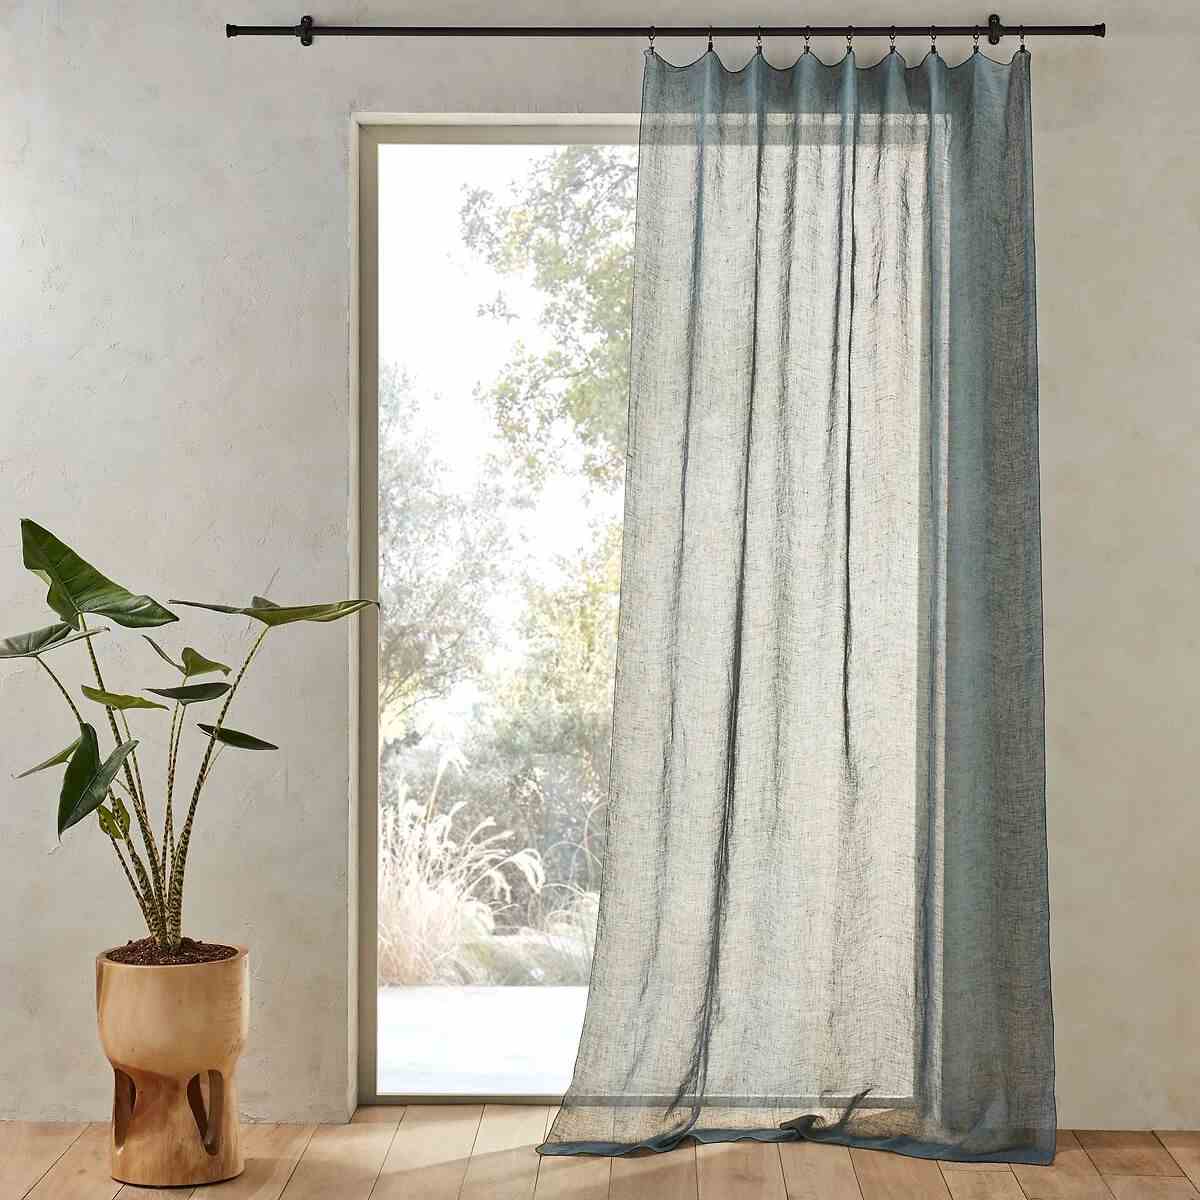 The Linen Voile Curtain 